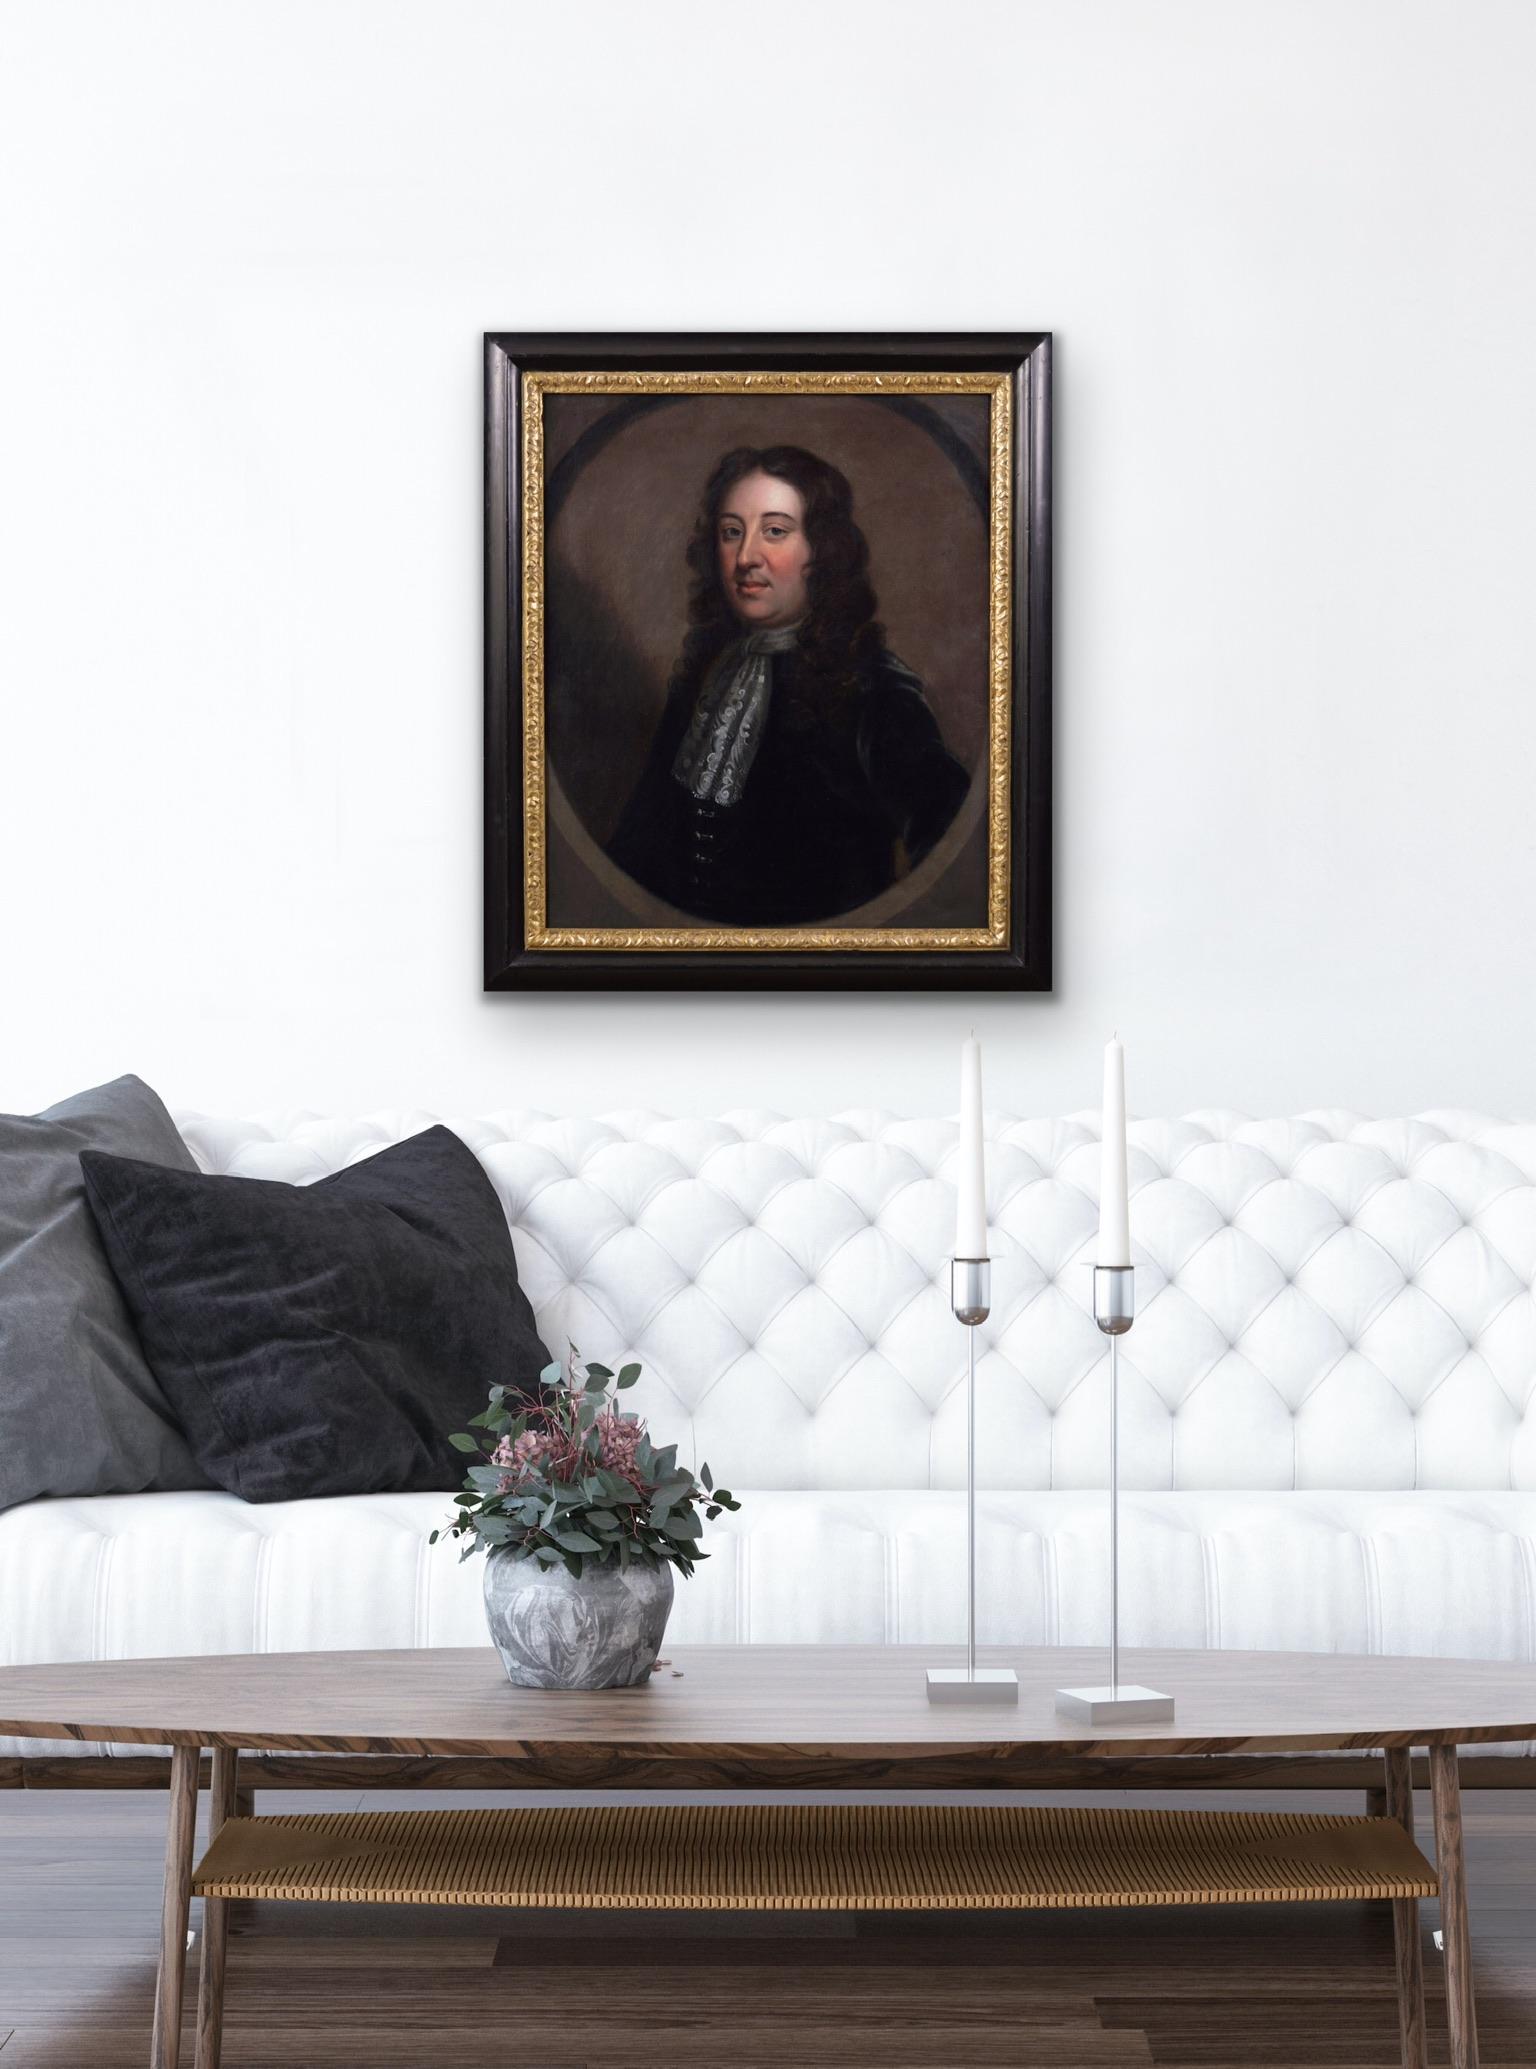 Circle of John Riley
British, (1646-1691)
Portrait of a Gentleman
Oil on canvas
Image size: 29 inches x 24 inches 
Size including frame: 36 inches x 31 inches

A fine half-length portrait of a gentleman set in a feigned stone oval, C1690, circle of